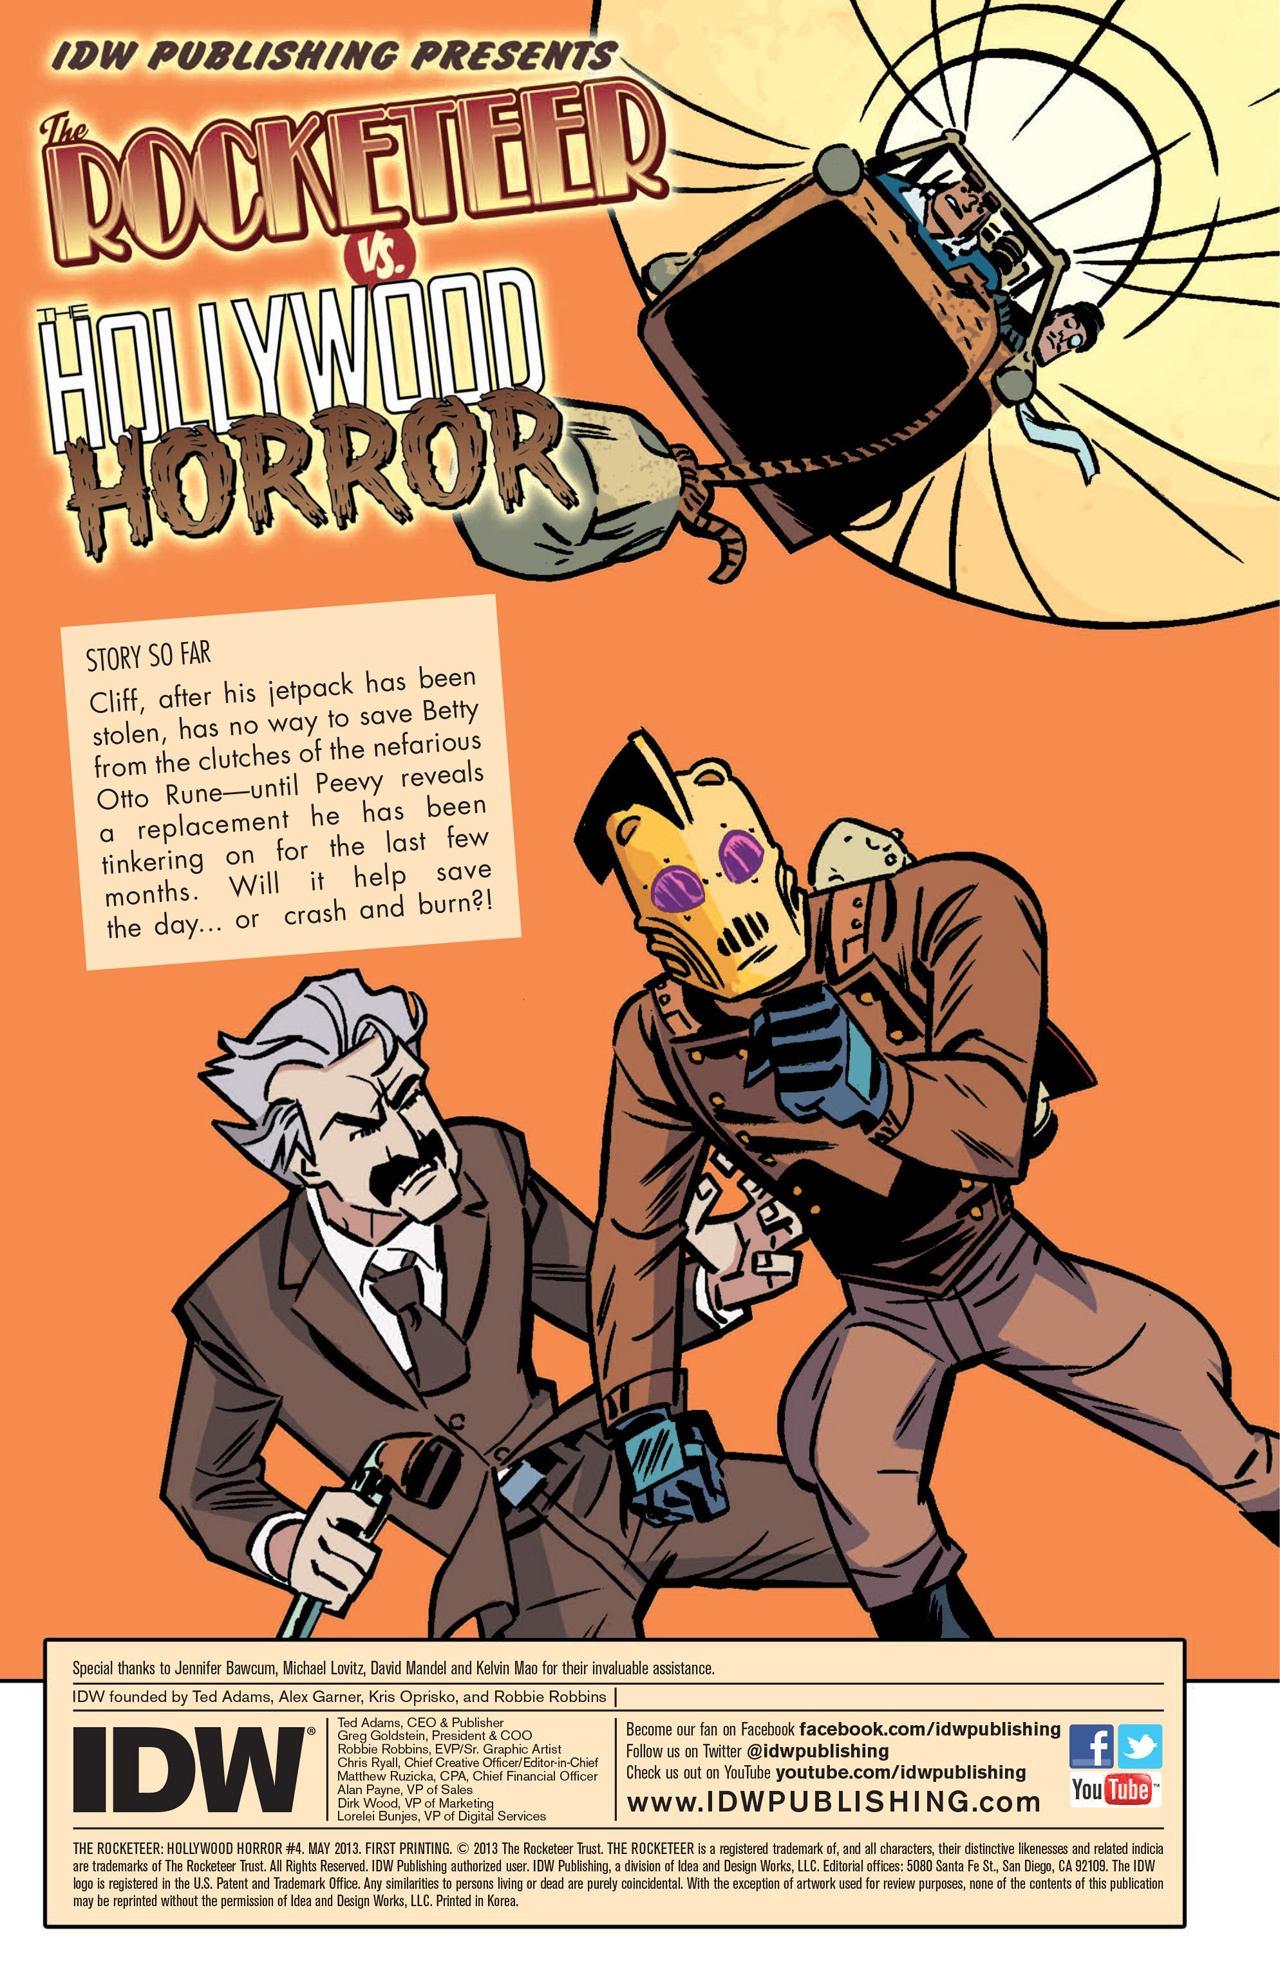 Read online The Rocketeer: Hollywood Horror comic -  Issue #4 - 2